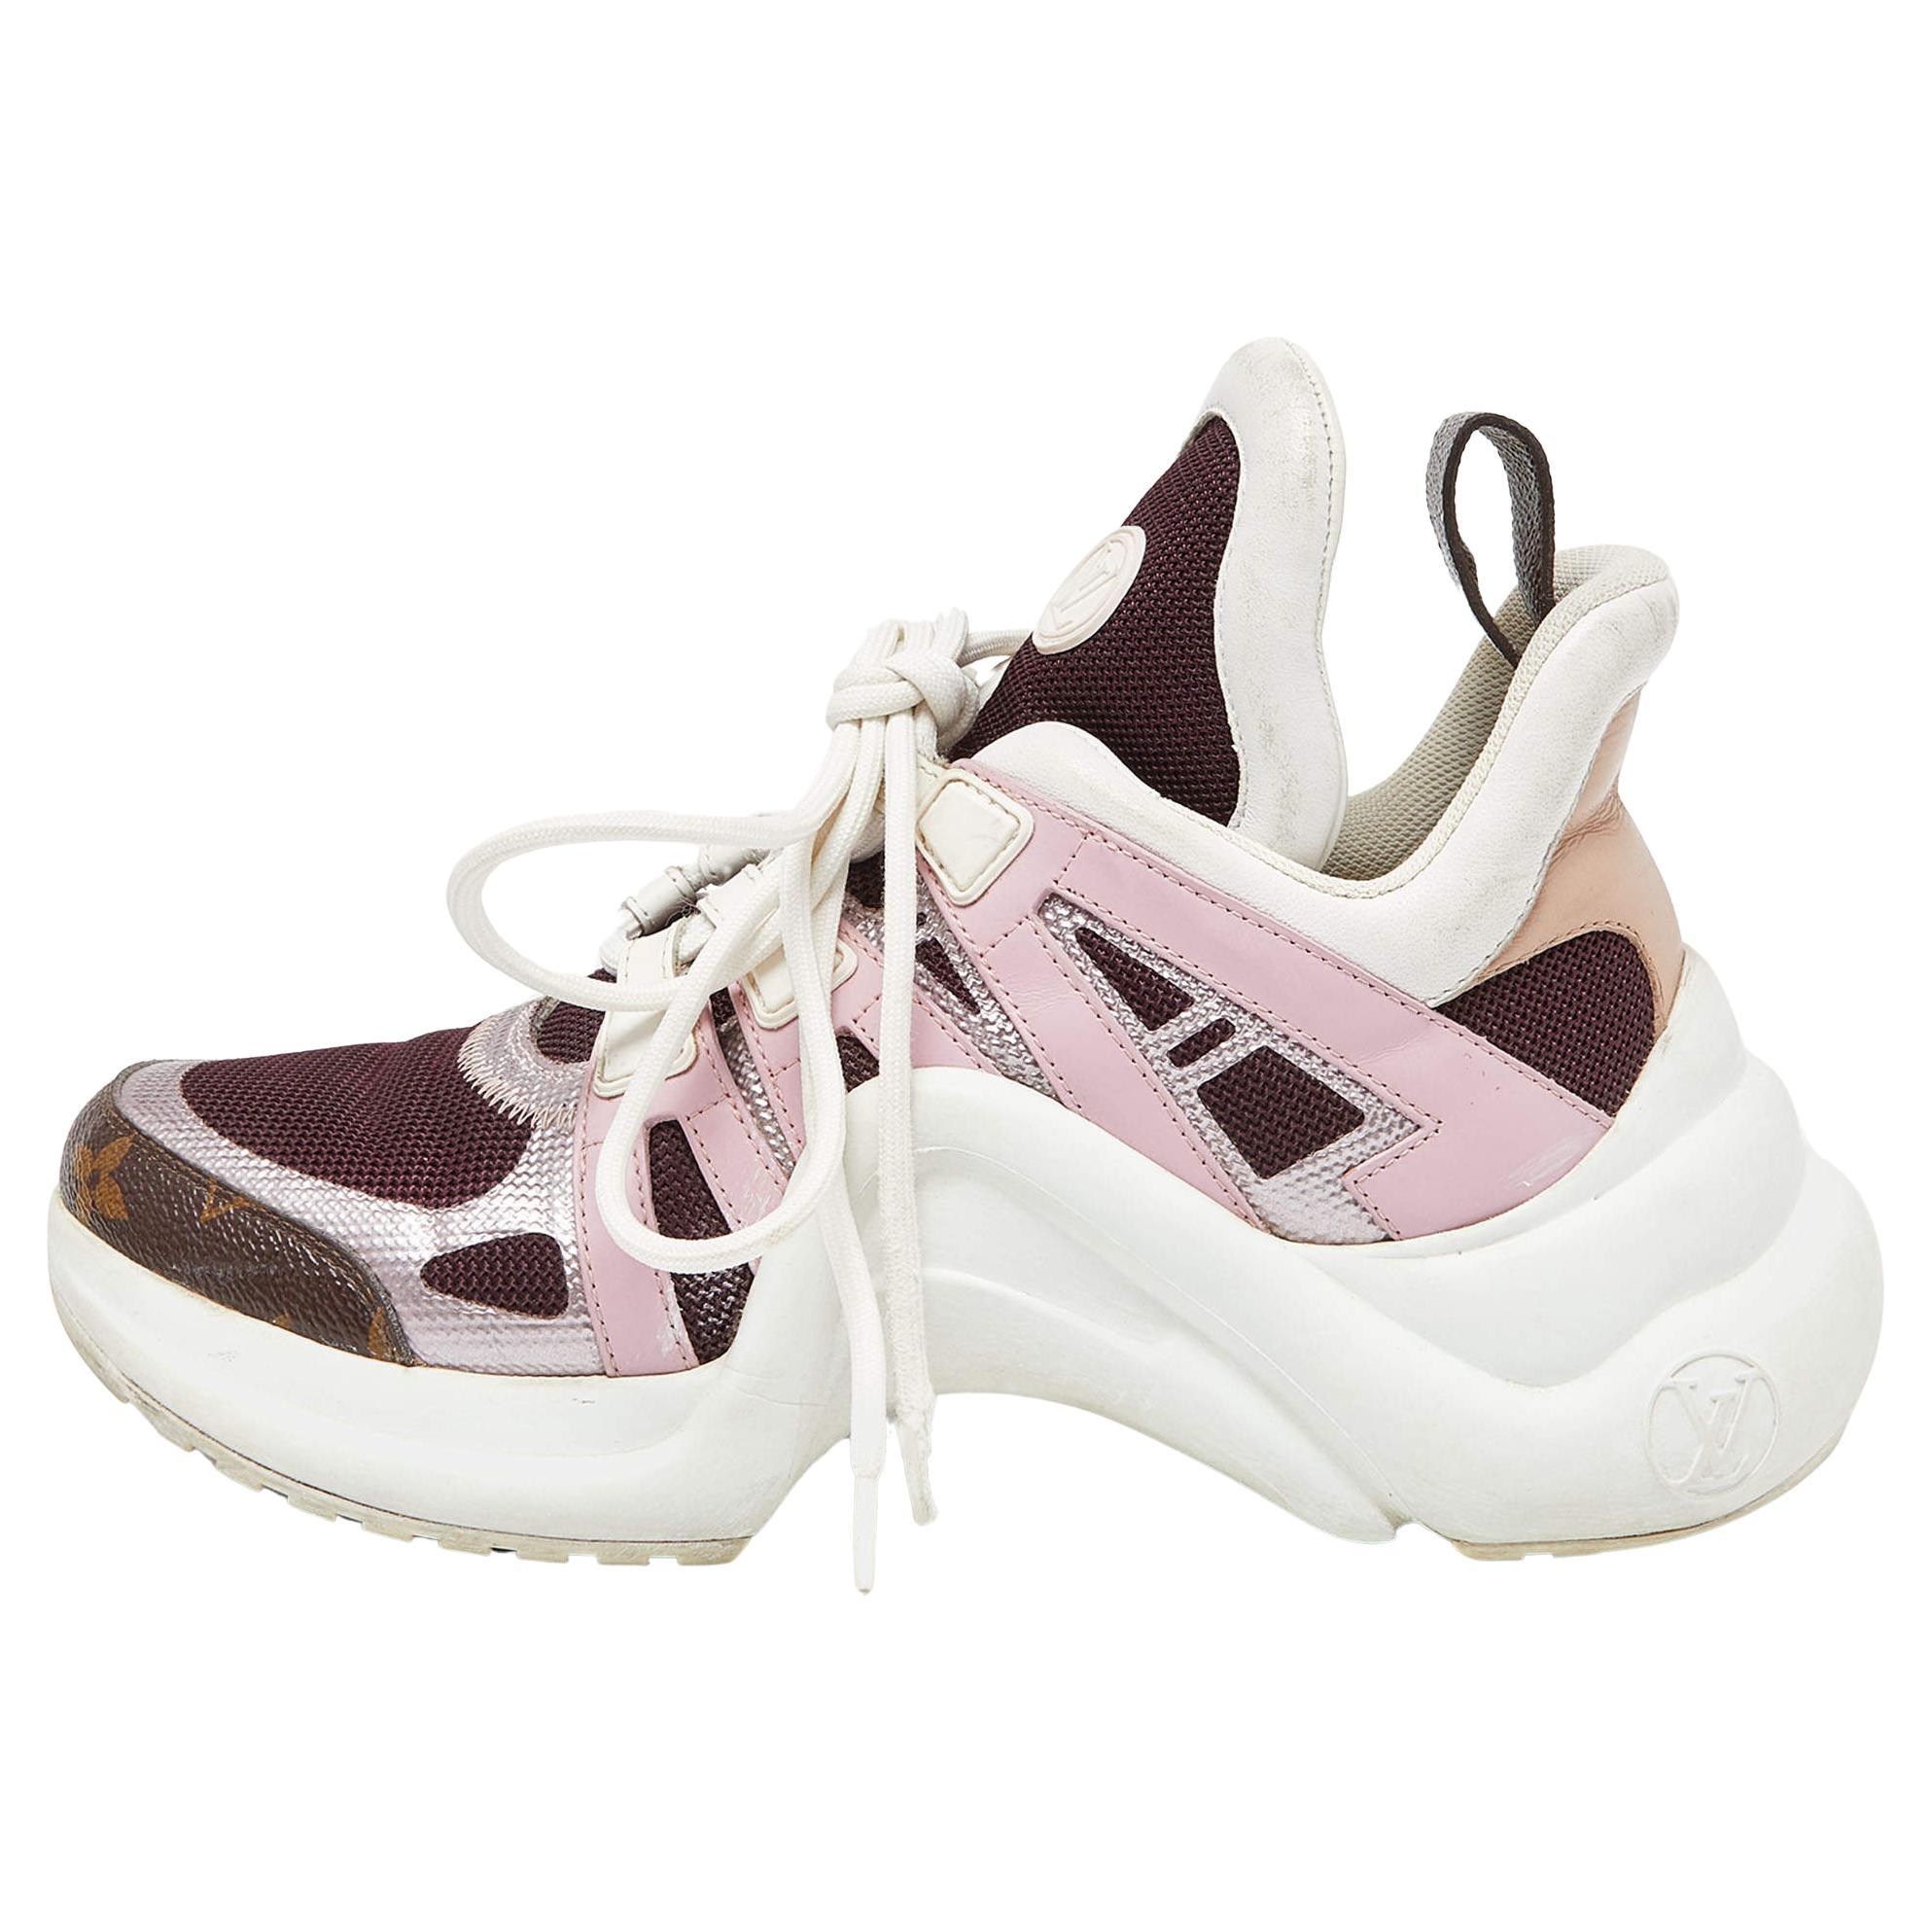 Louis Vuitton Tricolor Leather and Mesh Archlight Sneakers Size 36.5 For Sale